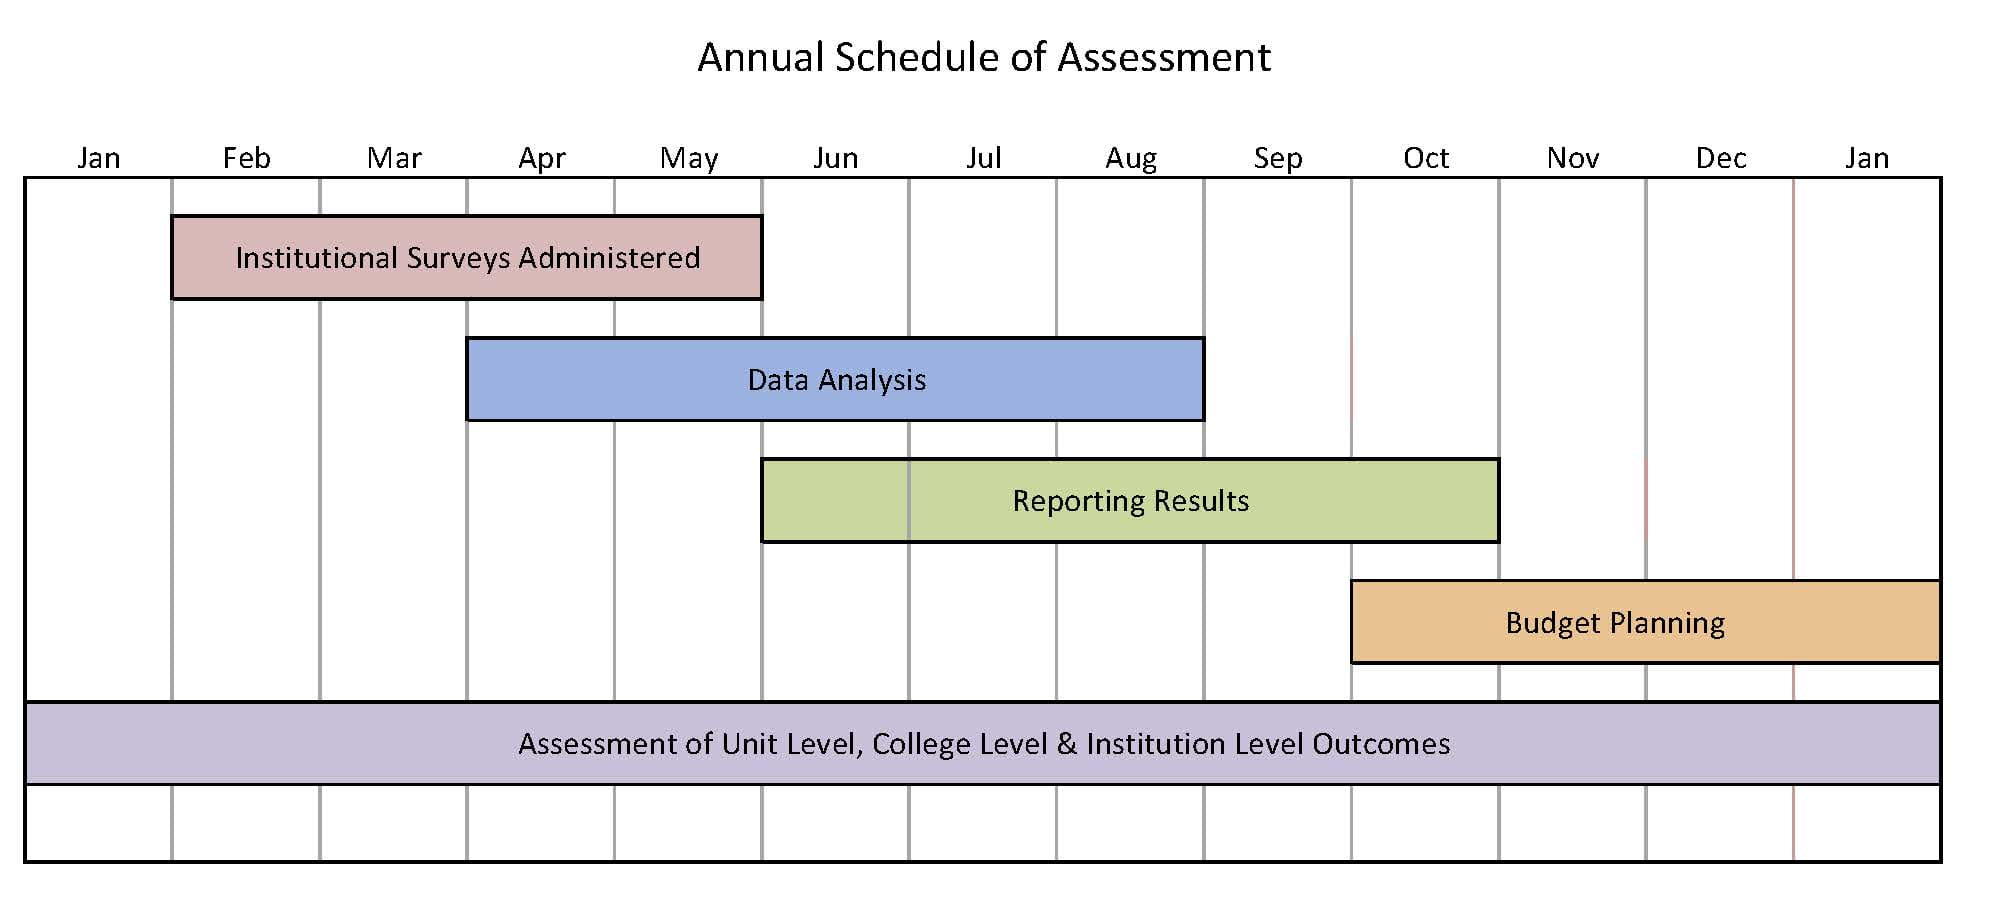 Image shows the annual assessment schedule